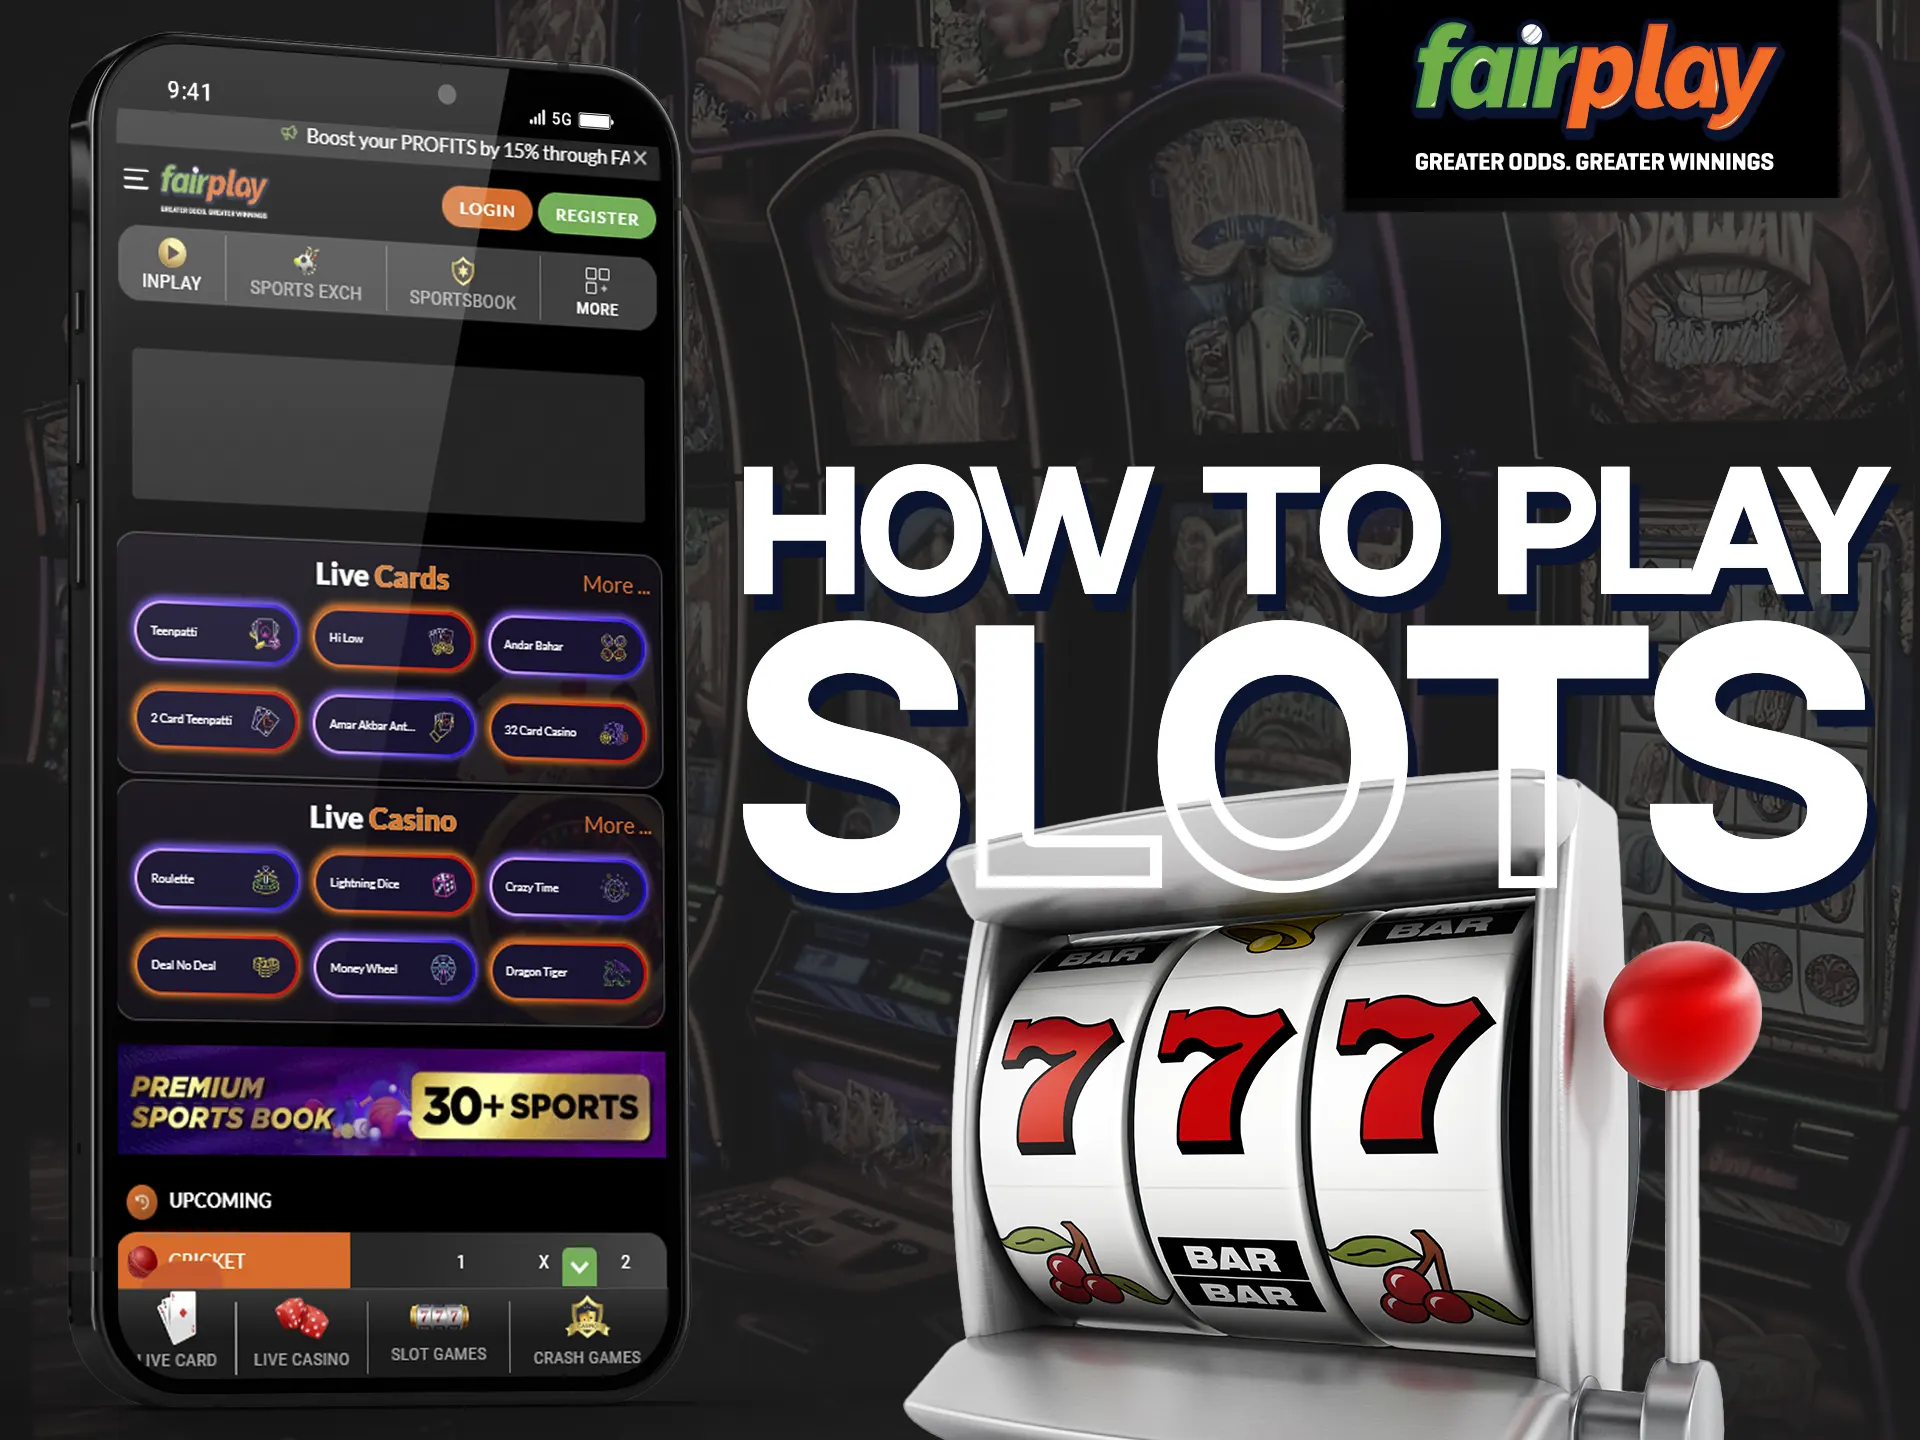 Learn how to start playing slots at Fairplay.